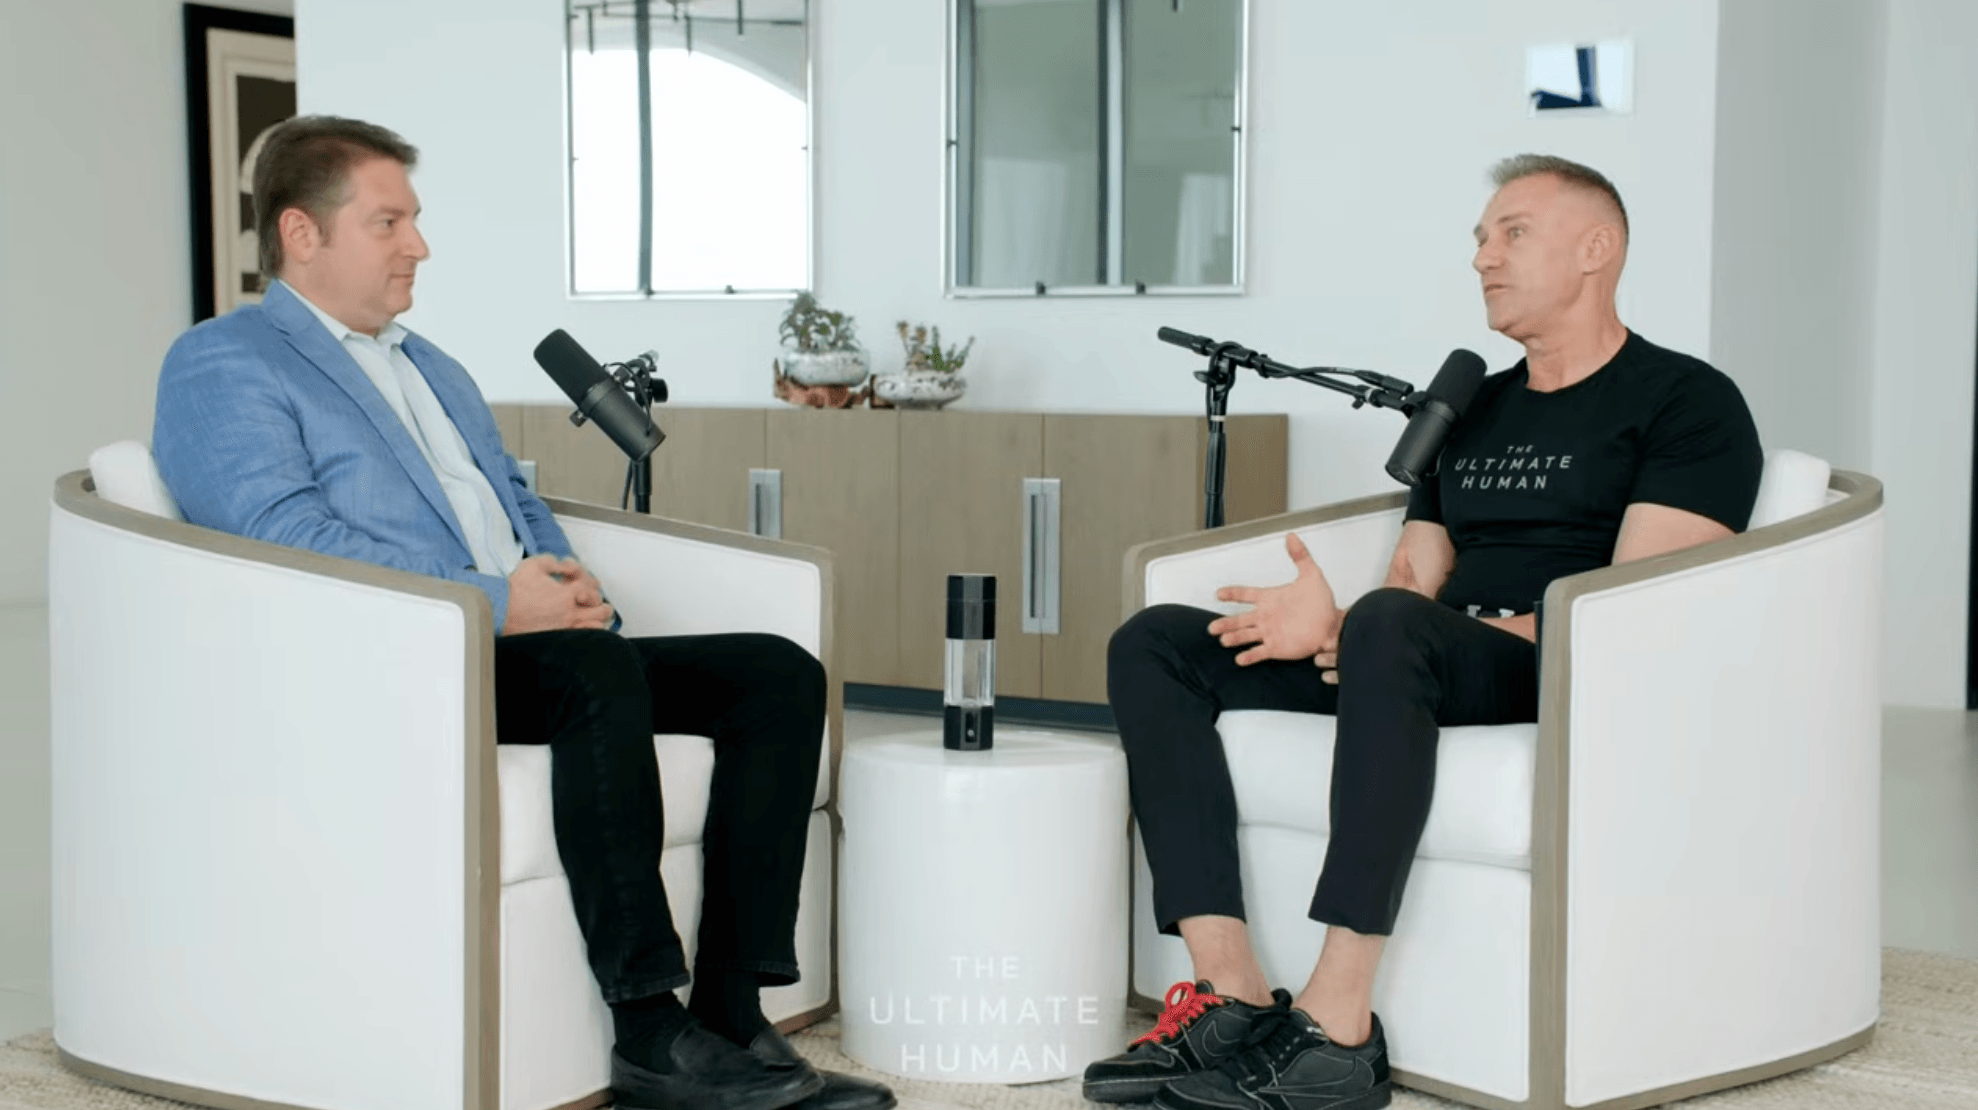 The Ultimate Human Podcast: Echo Founder Paul Barattiero Discusses the Benefits of Hydrogen Water with Gary Brecka - Echo Technologies